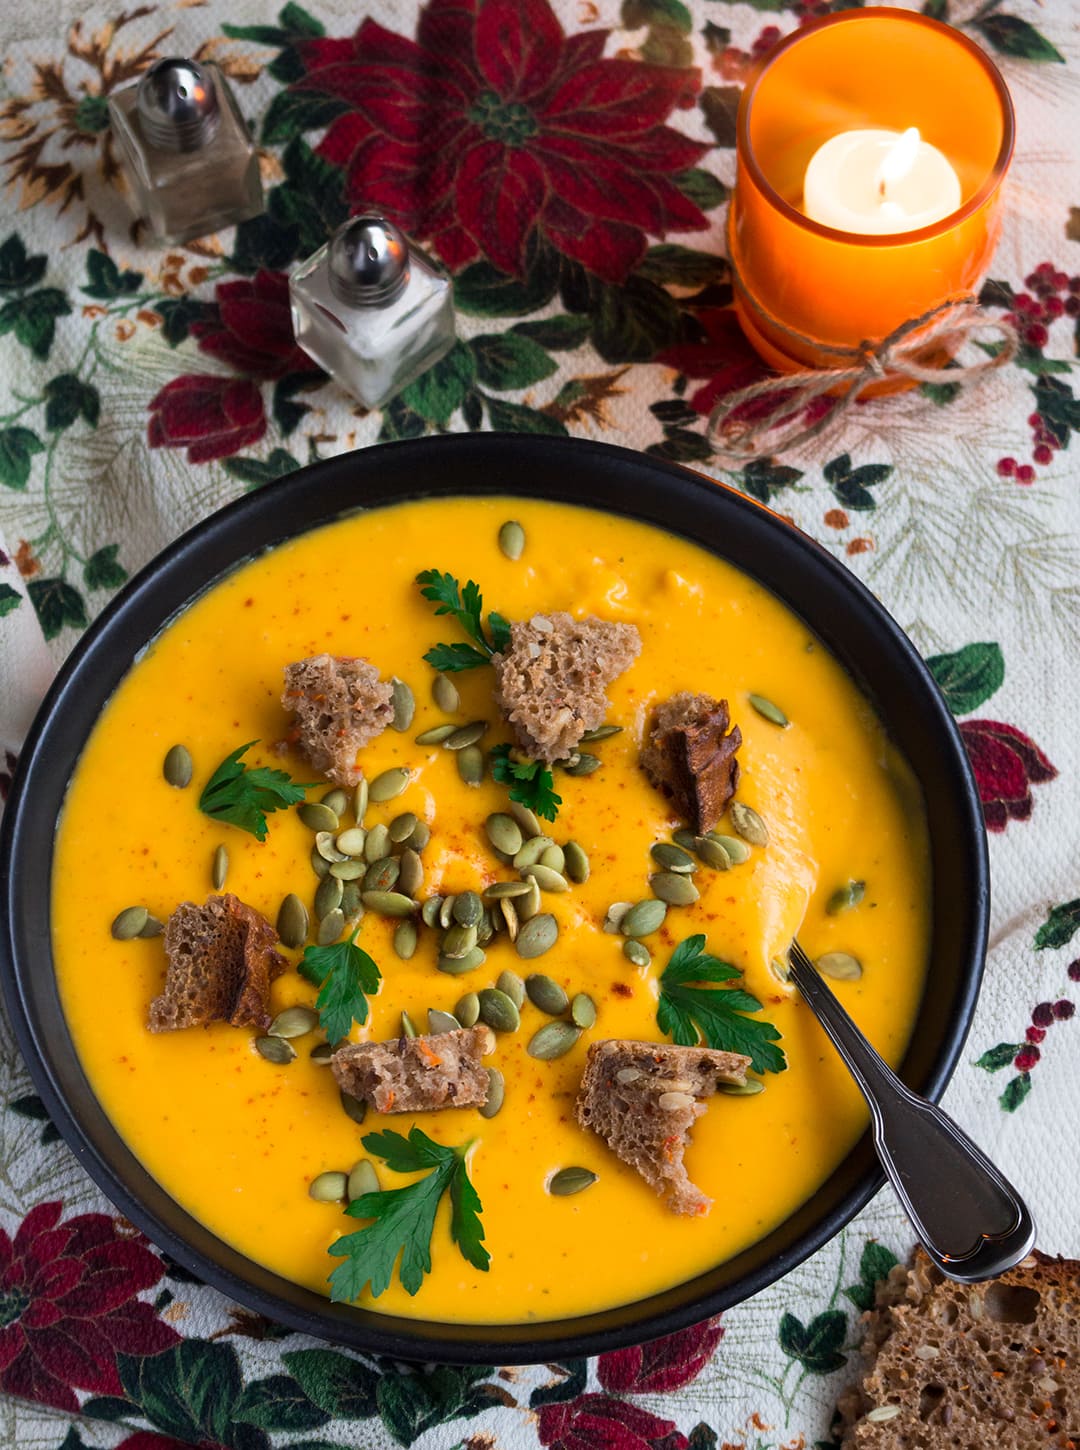 Vegan Creamy Roasted Butternut Squash Soup - delicious and easy fall recipe and the ultime comfort food! It's freezer friendly so you can double the recipe to enjoy it later. | thehealthfulideas.com